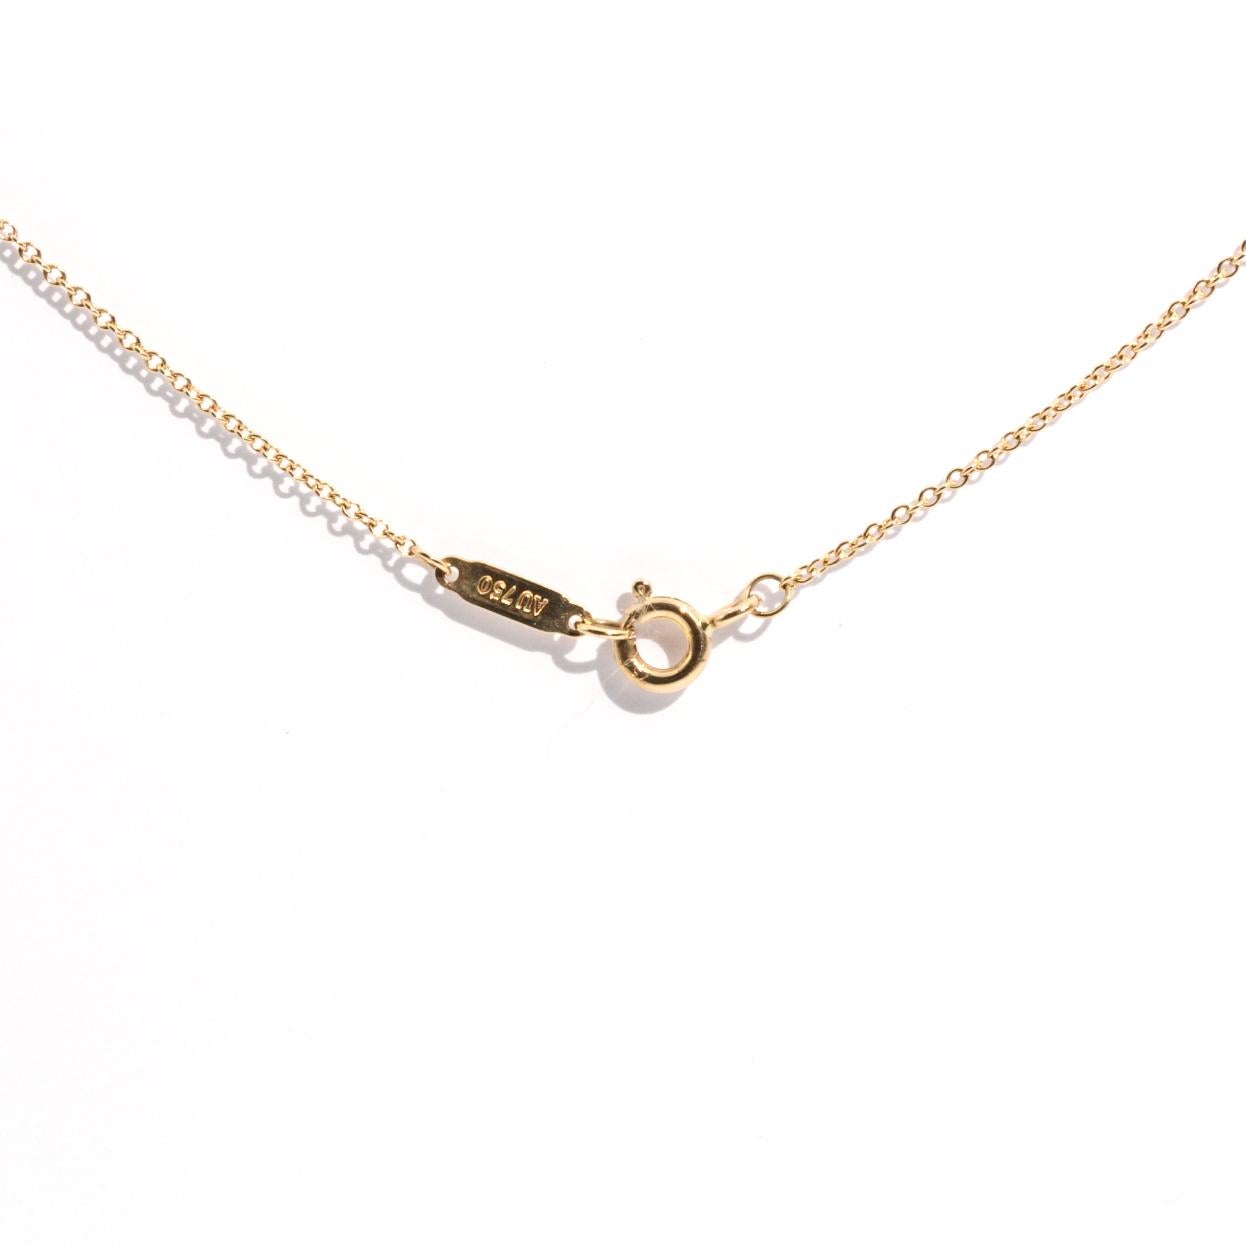 Women's Tiffany & Co. Notes Heart Pendant and Tiffany Chain in 18 Carat Yellow Gold